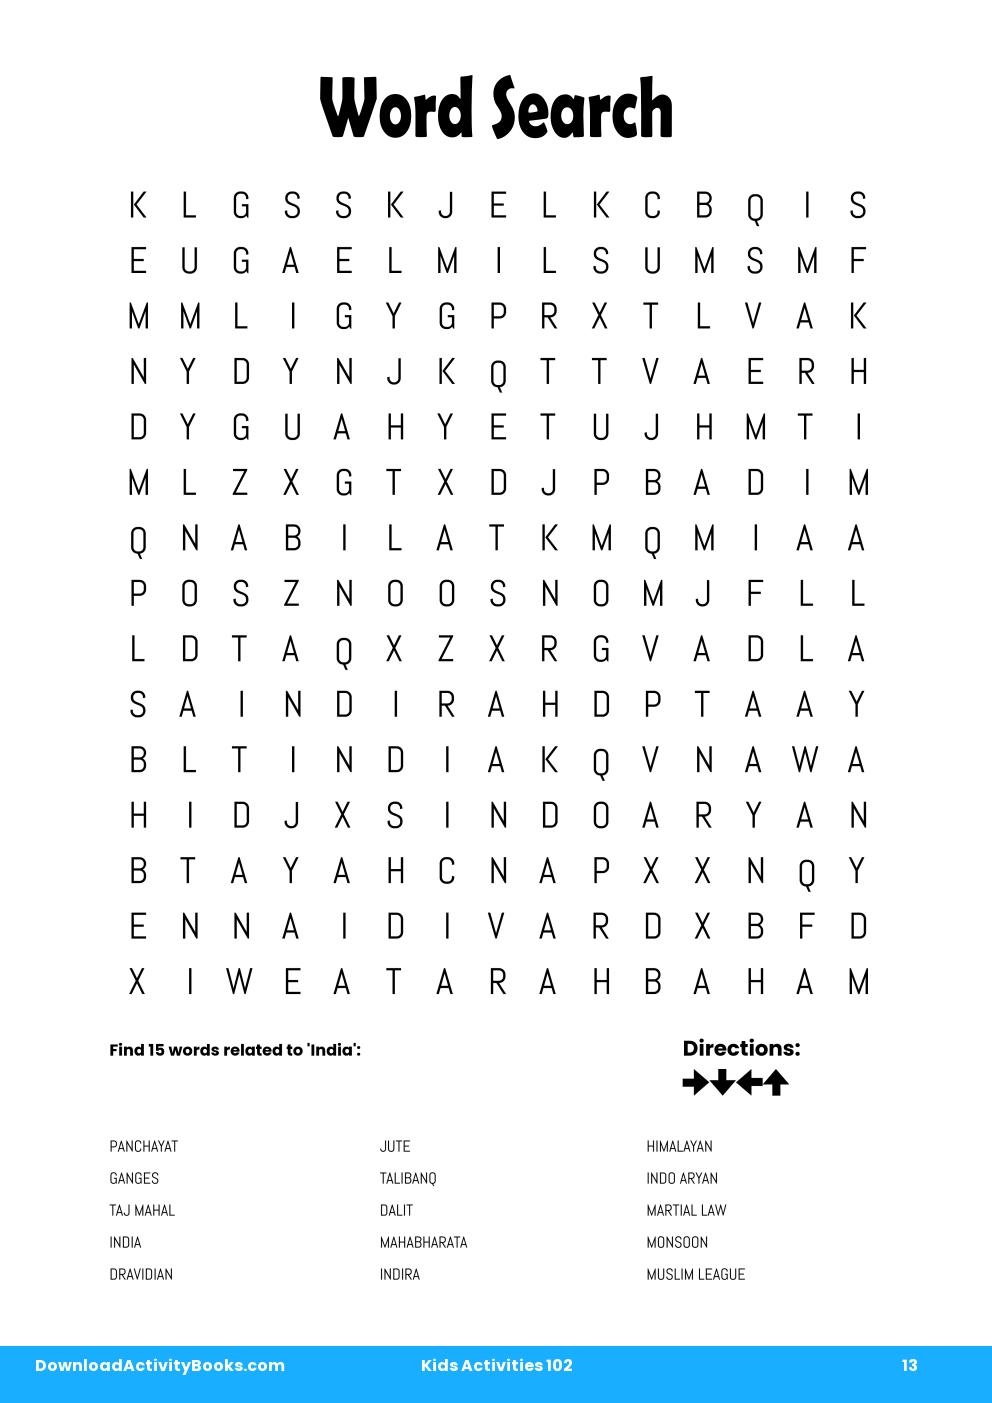 Word Search in Kids Activities 102